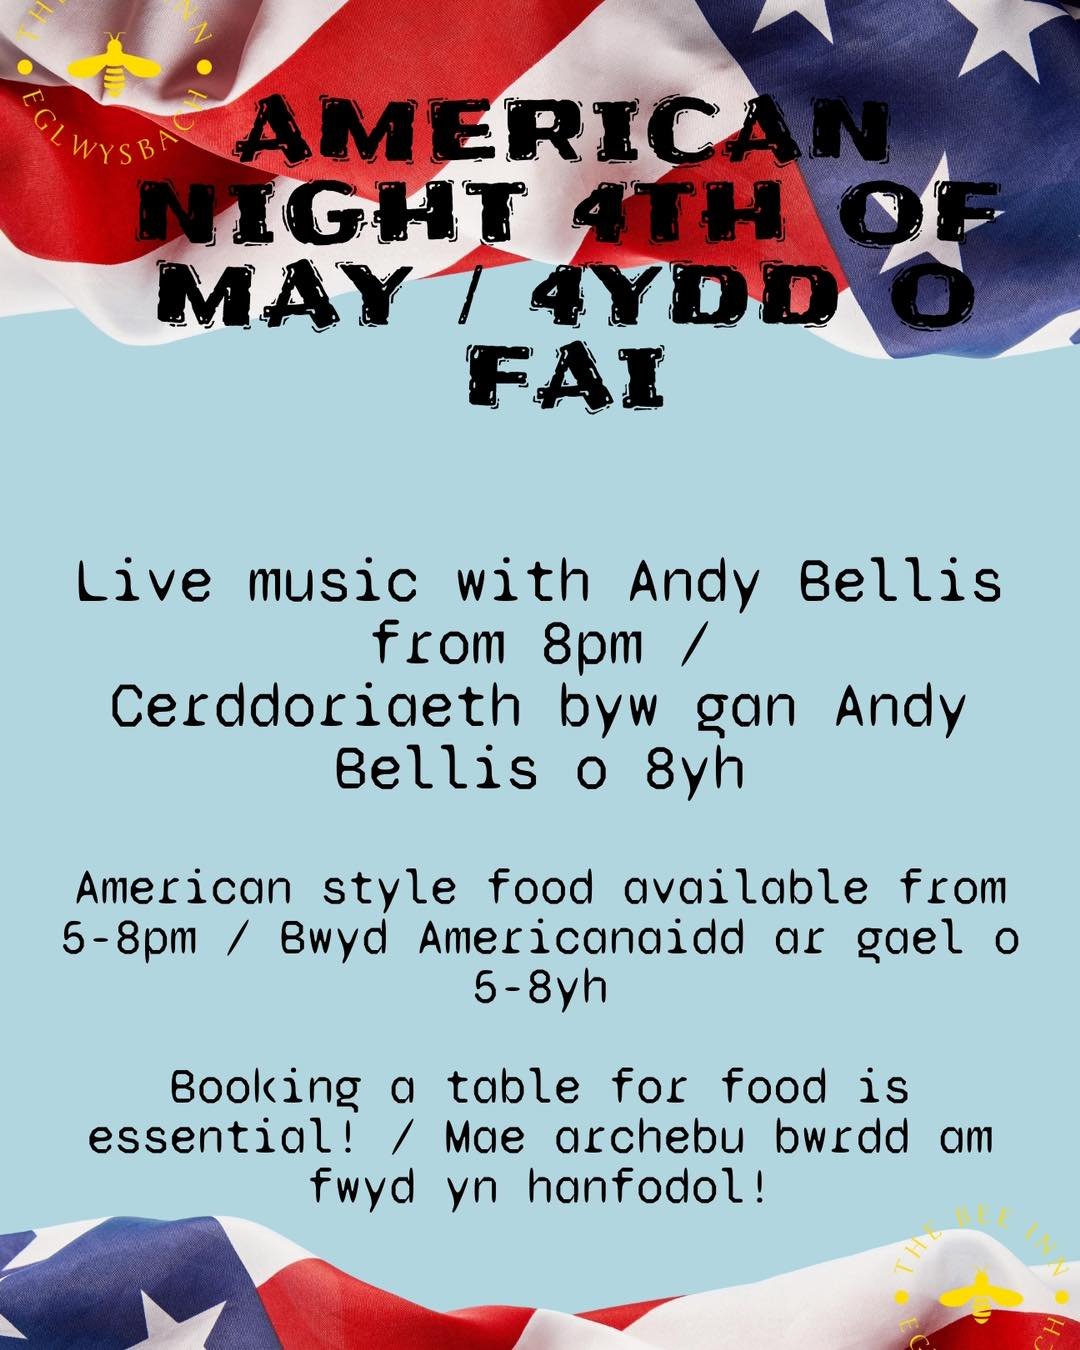 🇺🇸 American style food night followed by live music from Andy Bellis - THIS SATURDAY 🎶 

Only a couple of tables left for food so get in touch to book!